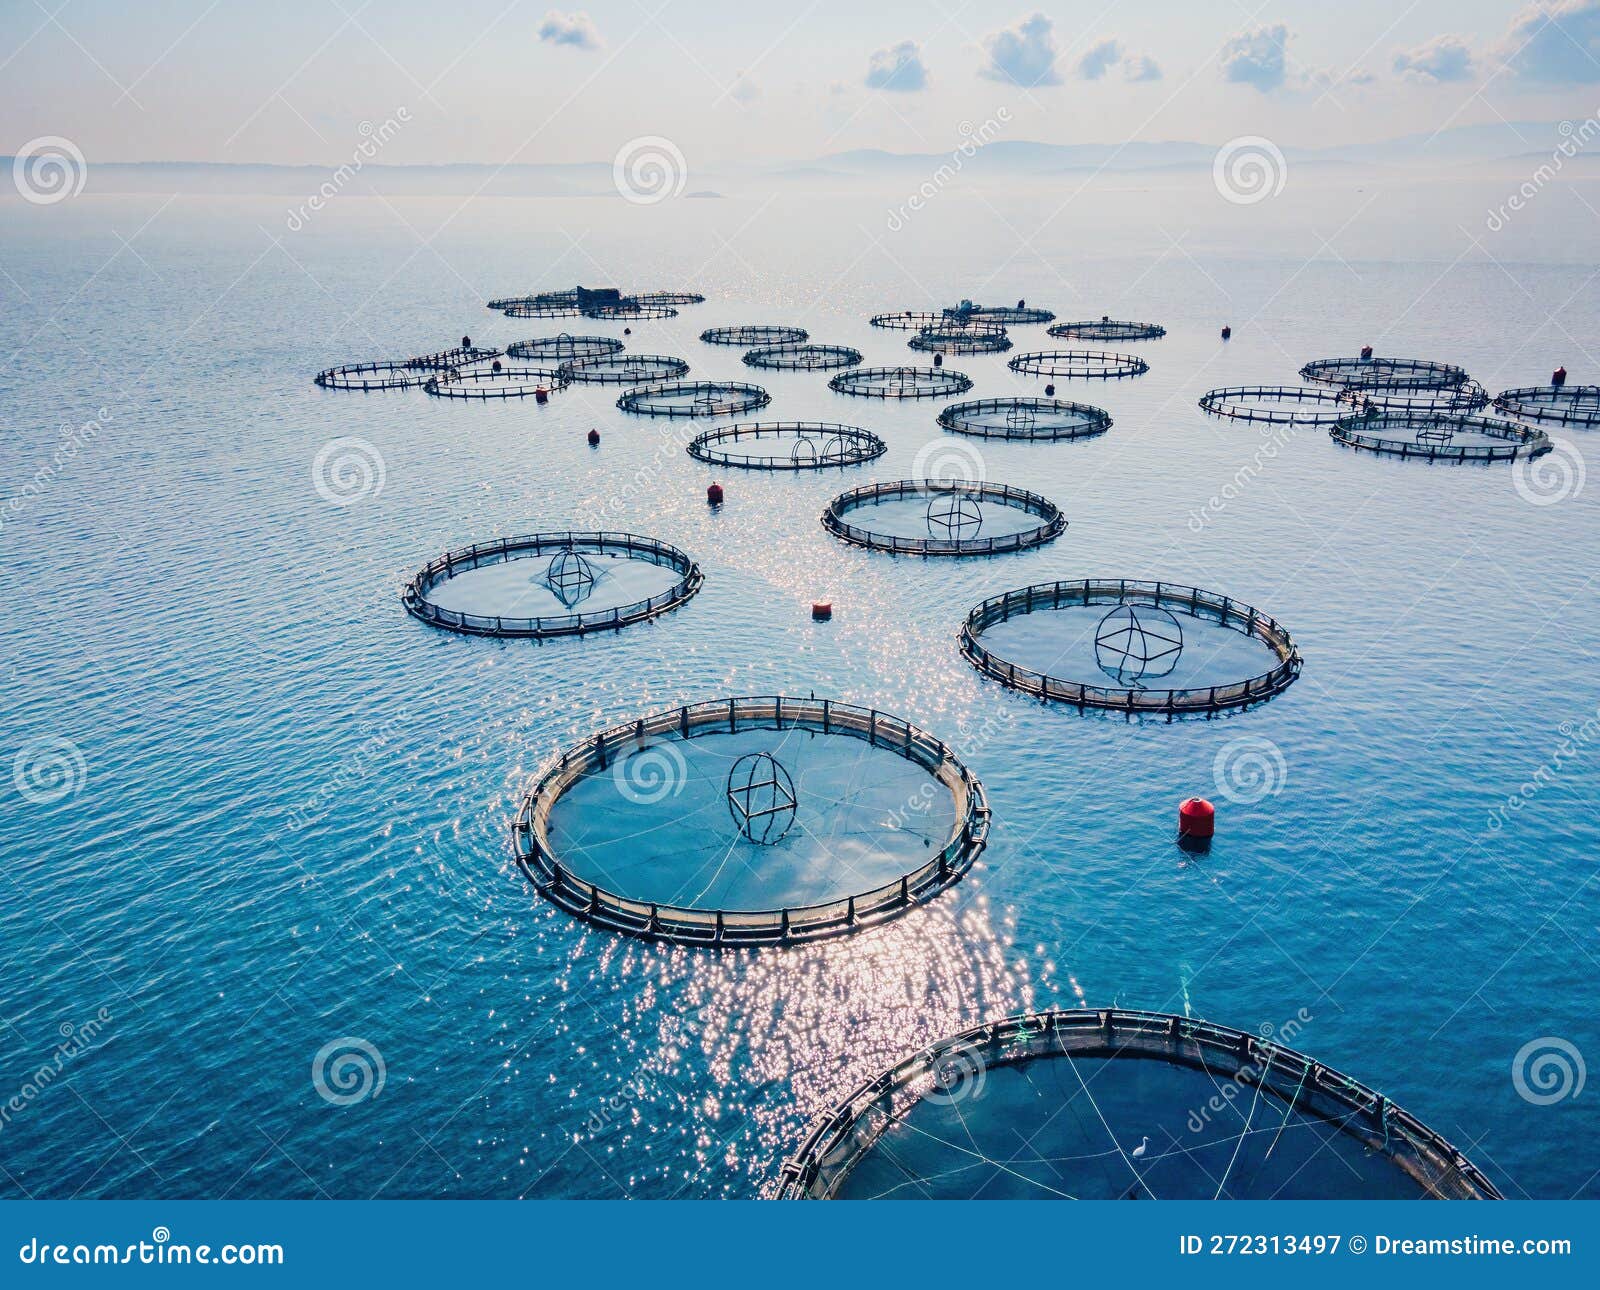 Fish Farm Floating Net Sea Water Surface Stock Image - Image of seafood,  drone: 272313497